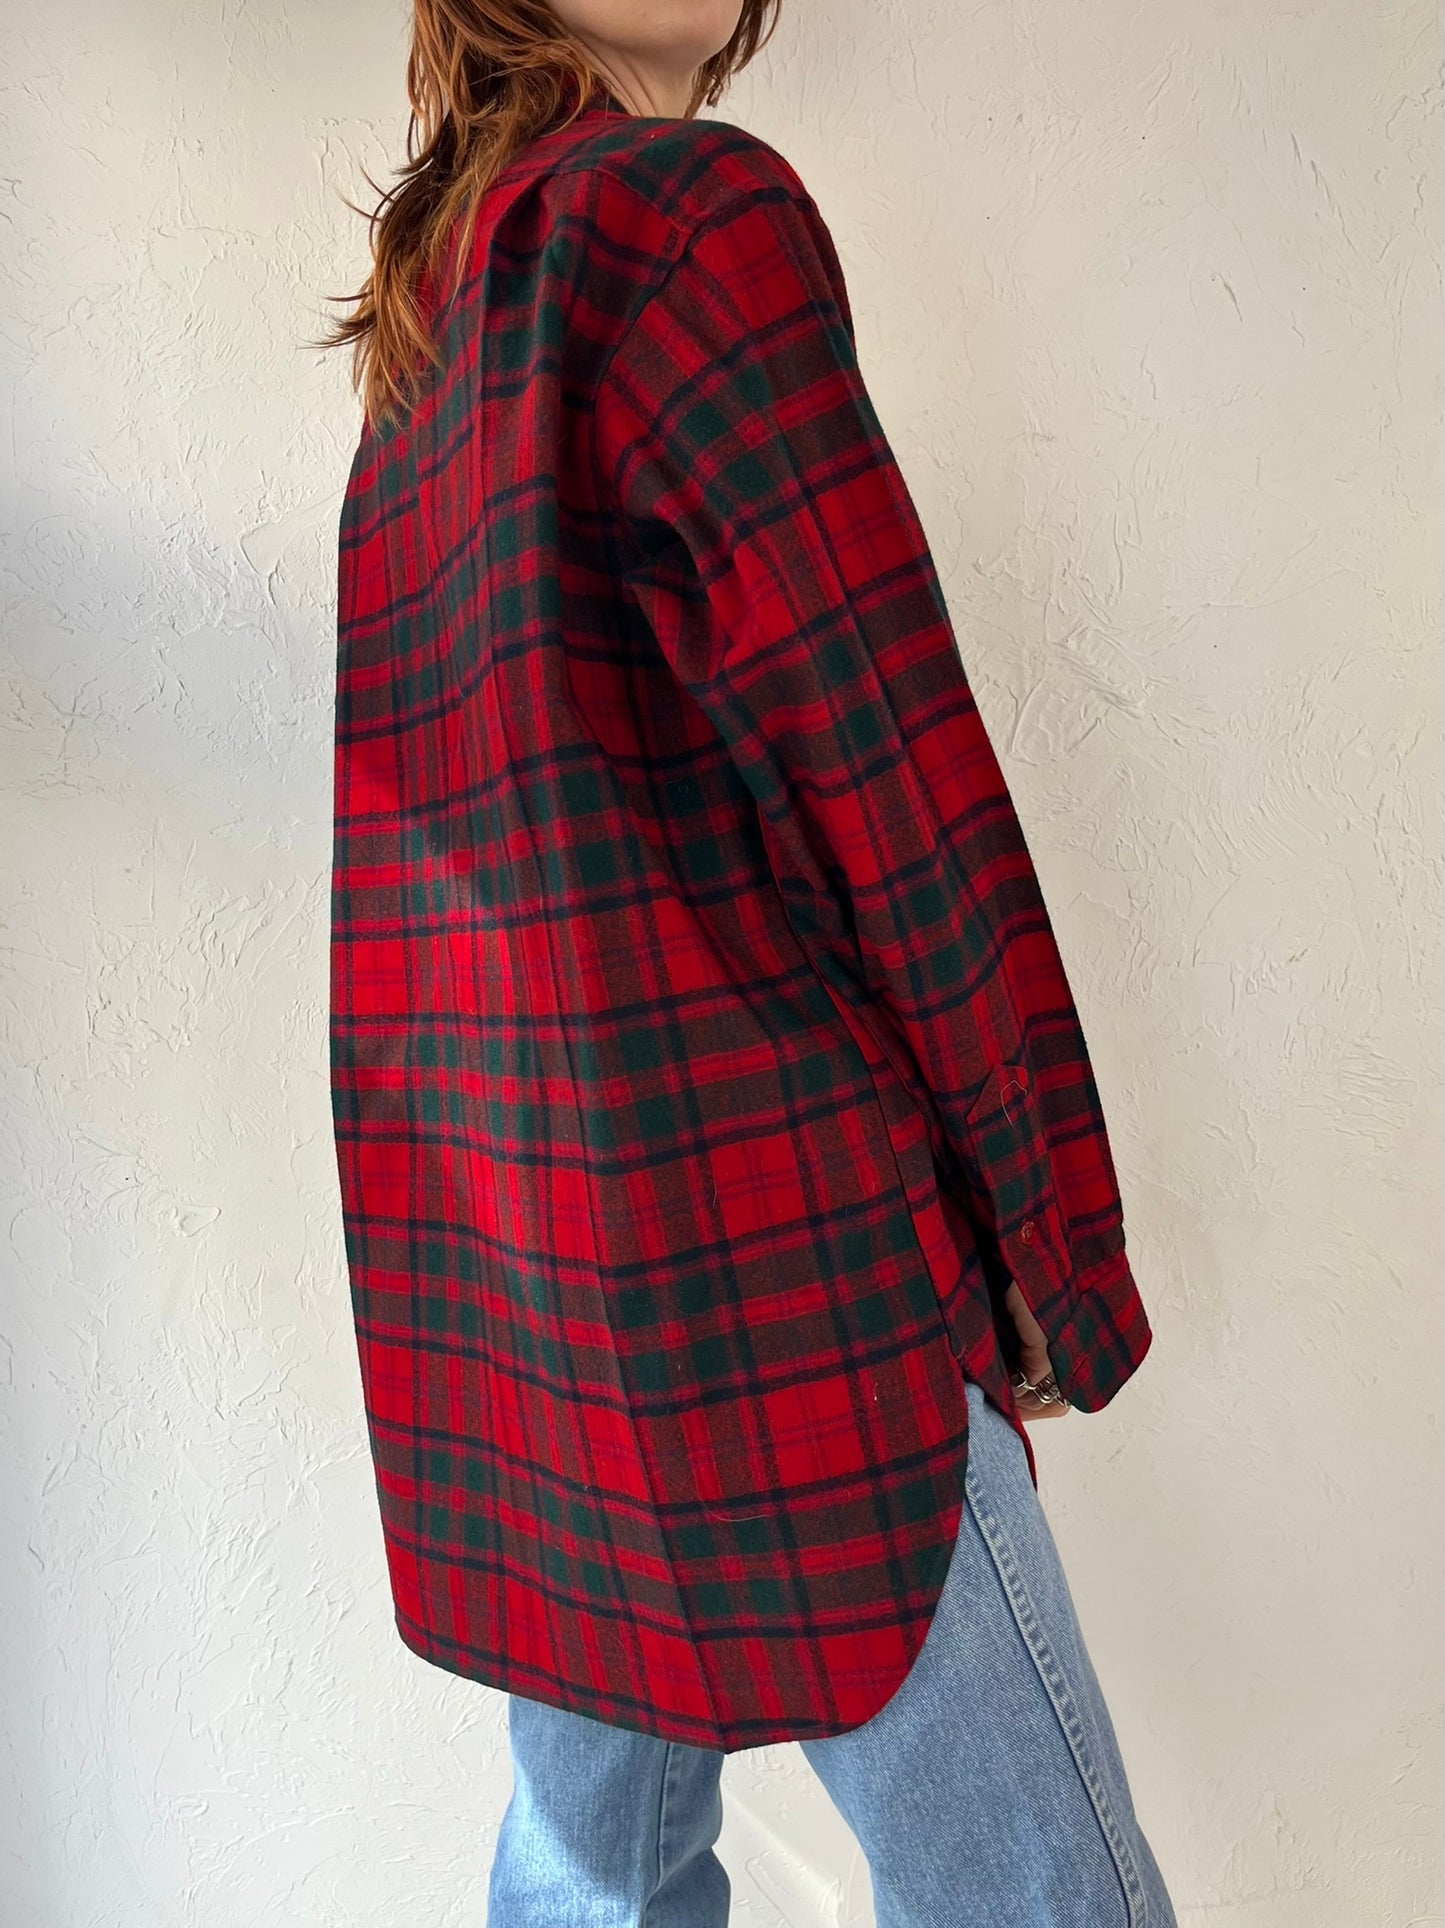 90s 'Pendleton' Classic Red Plaid Wool Button Up Shirt / Large